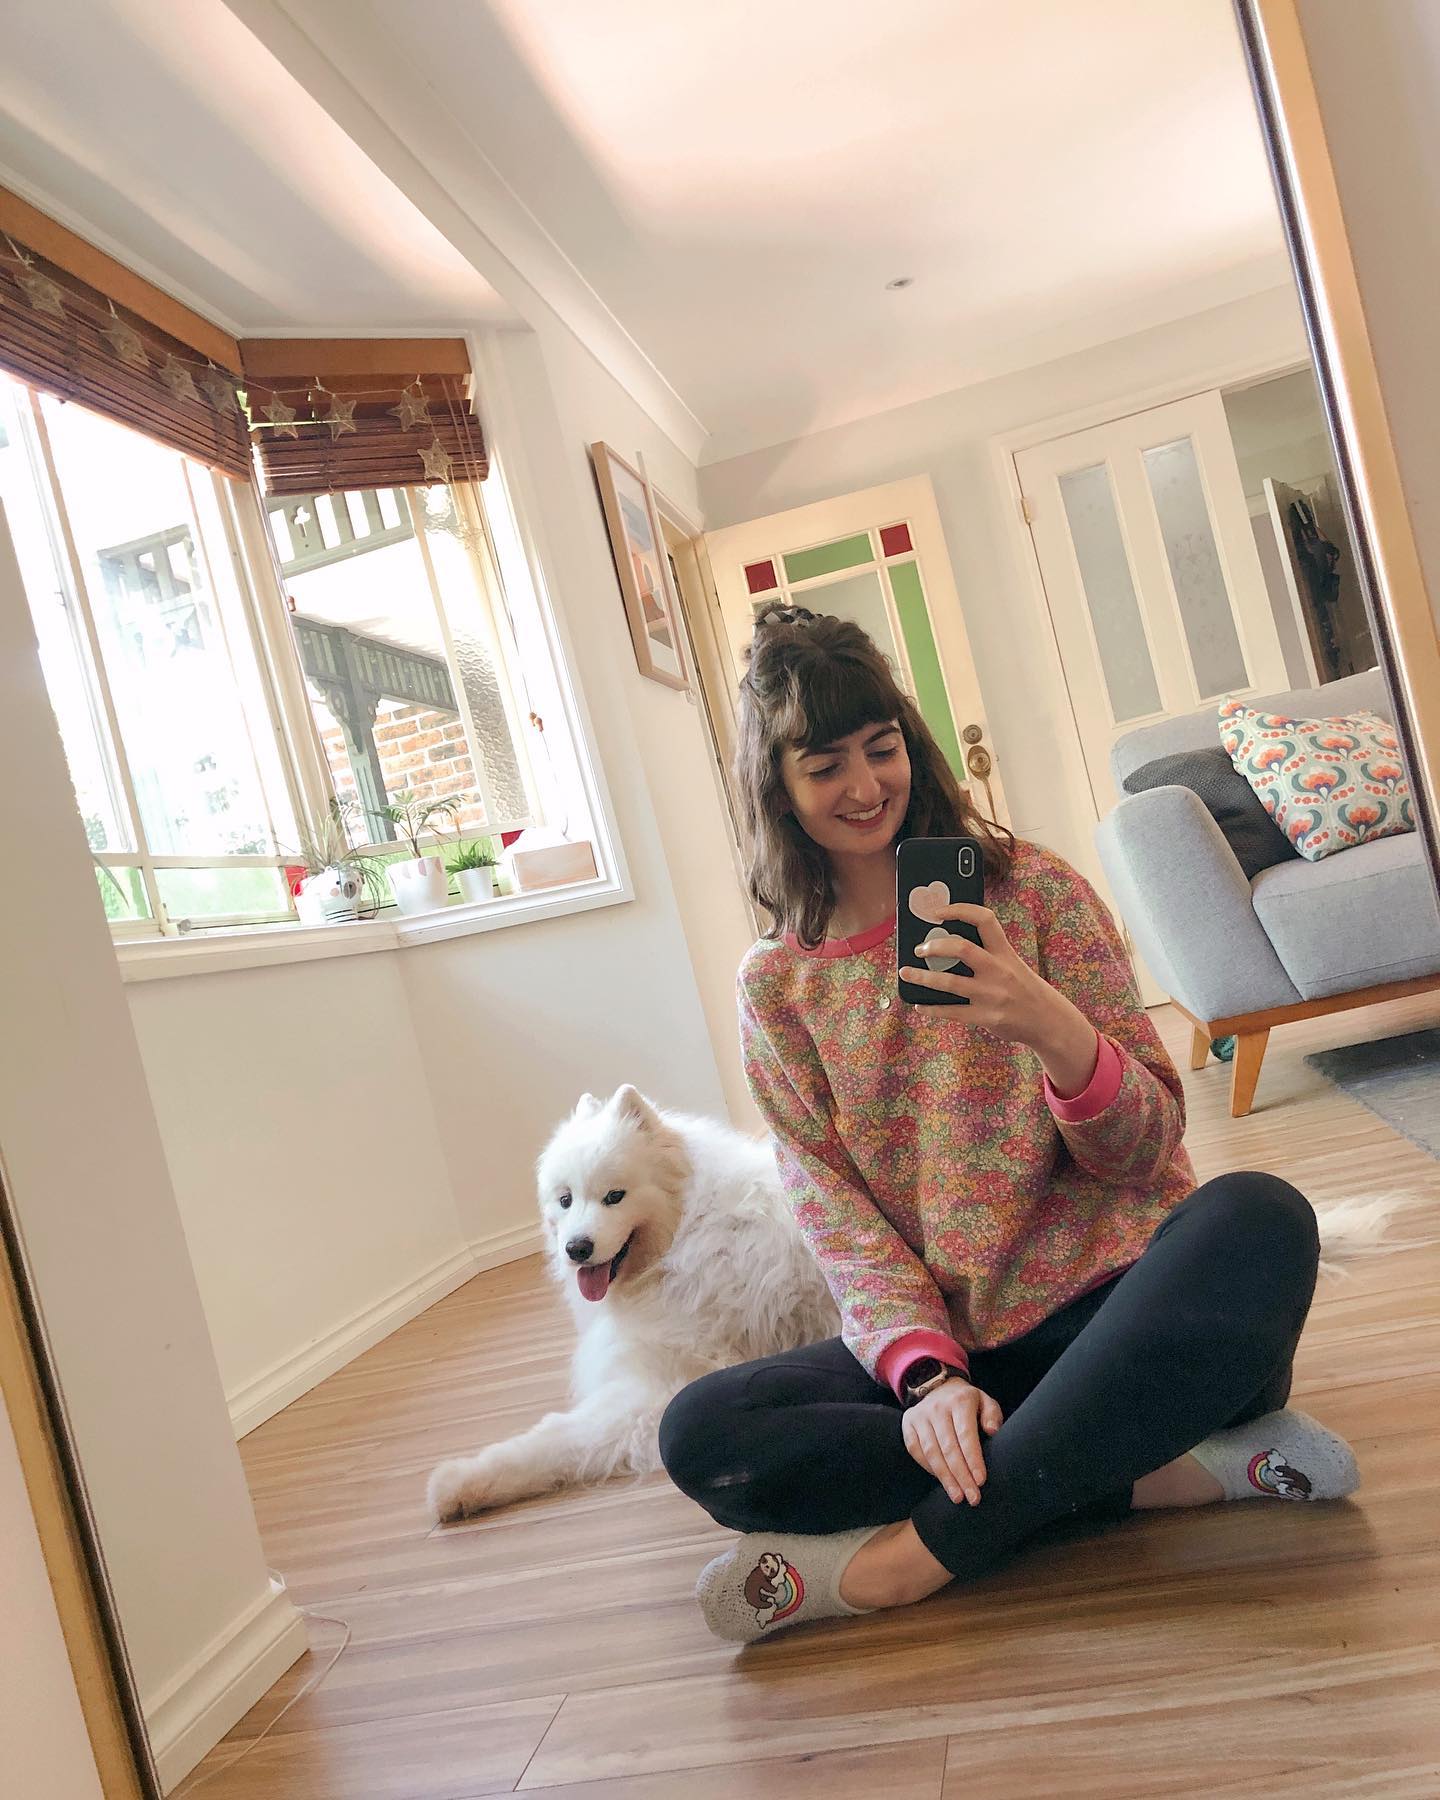 Taryn sitting on the floor wearing the first jumper she ever sewed. Lexi the samoyed dog is laying on the floor behind her.